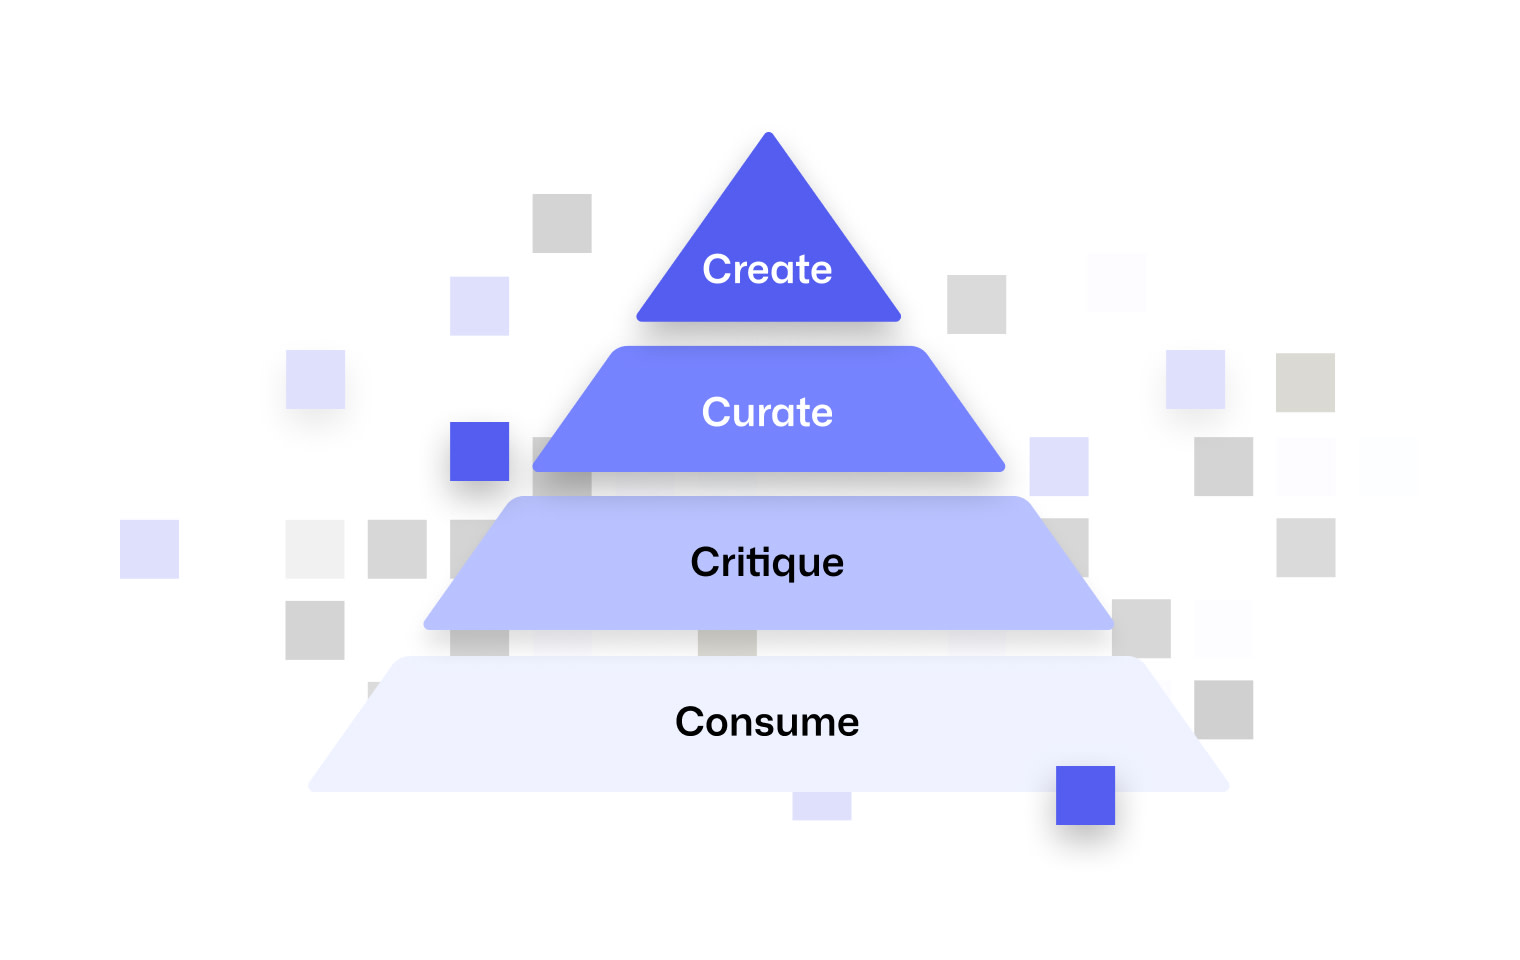 Pyramid with Create at the top, followed by Curate, Critique, and Consume